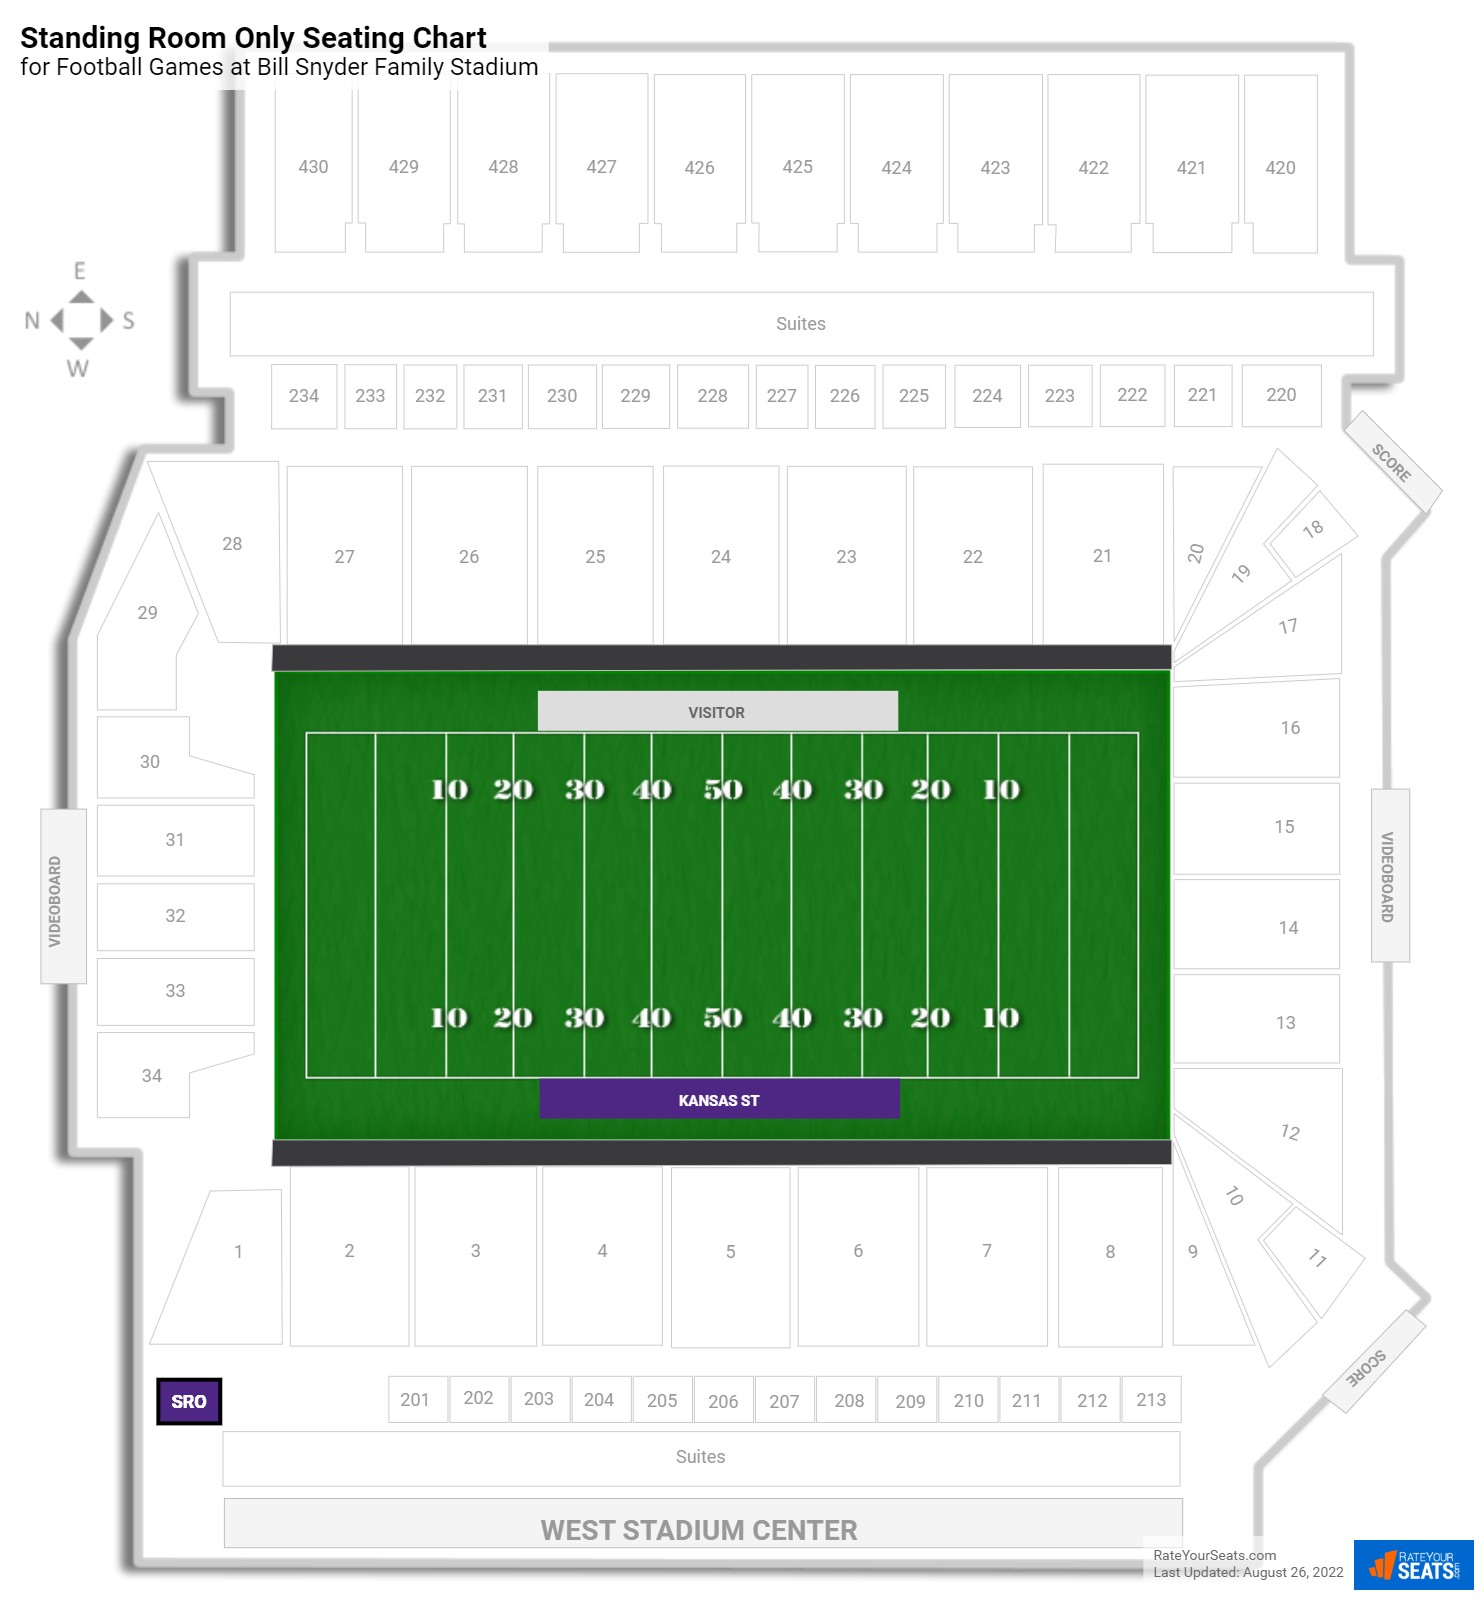 Football Standing Room Only Seating Chart at Bill Snyder Family Stadium